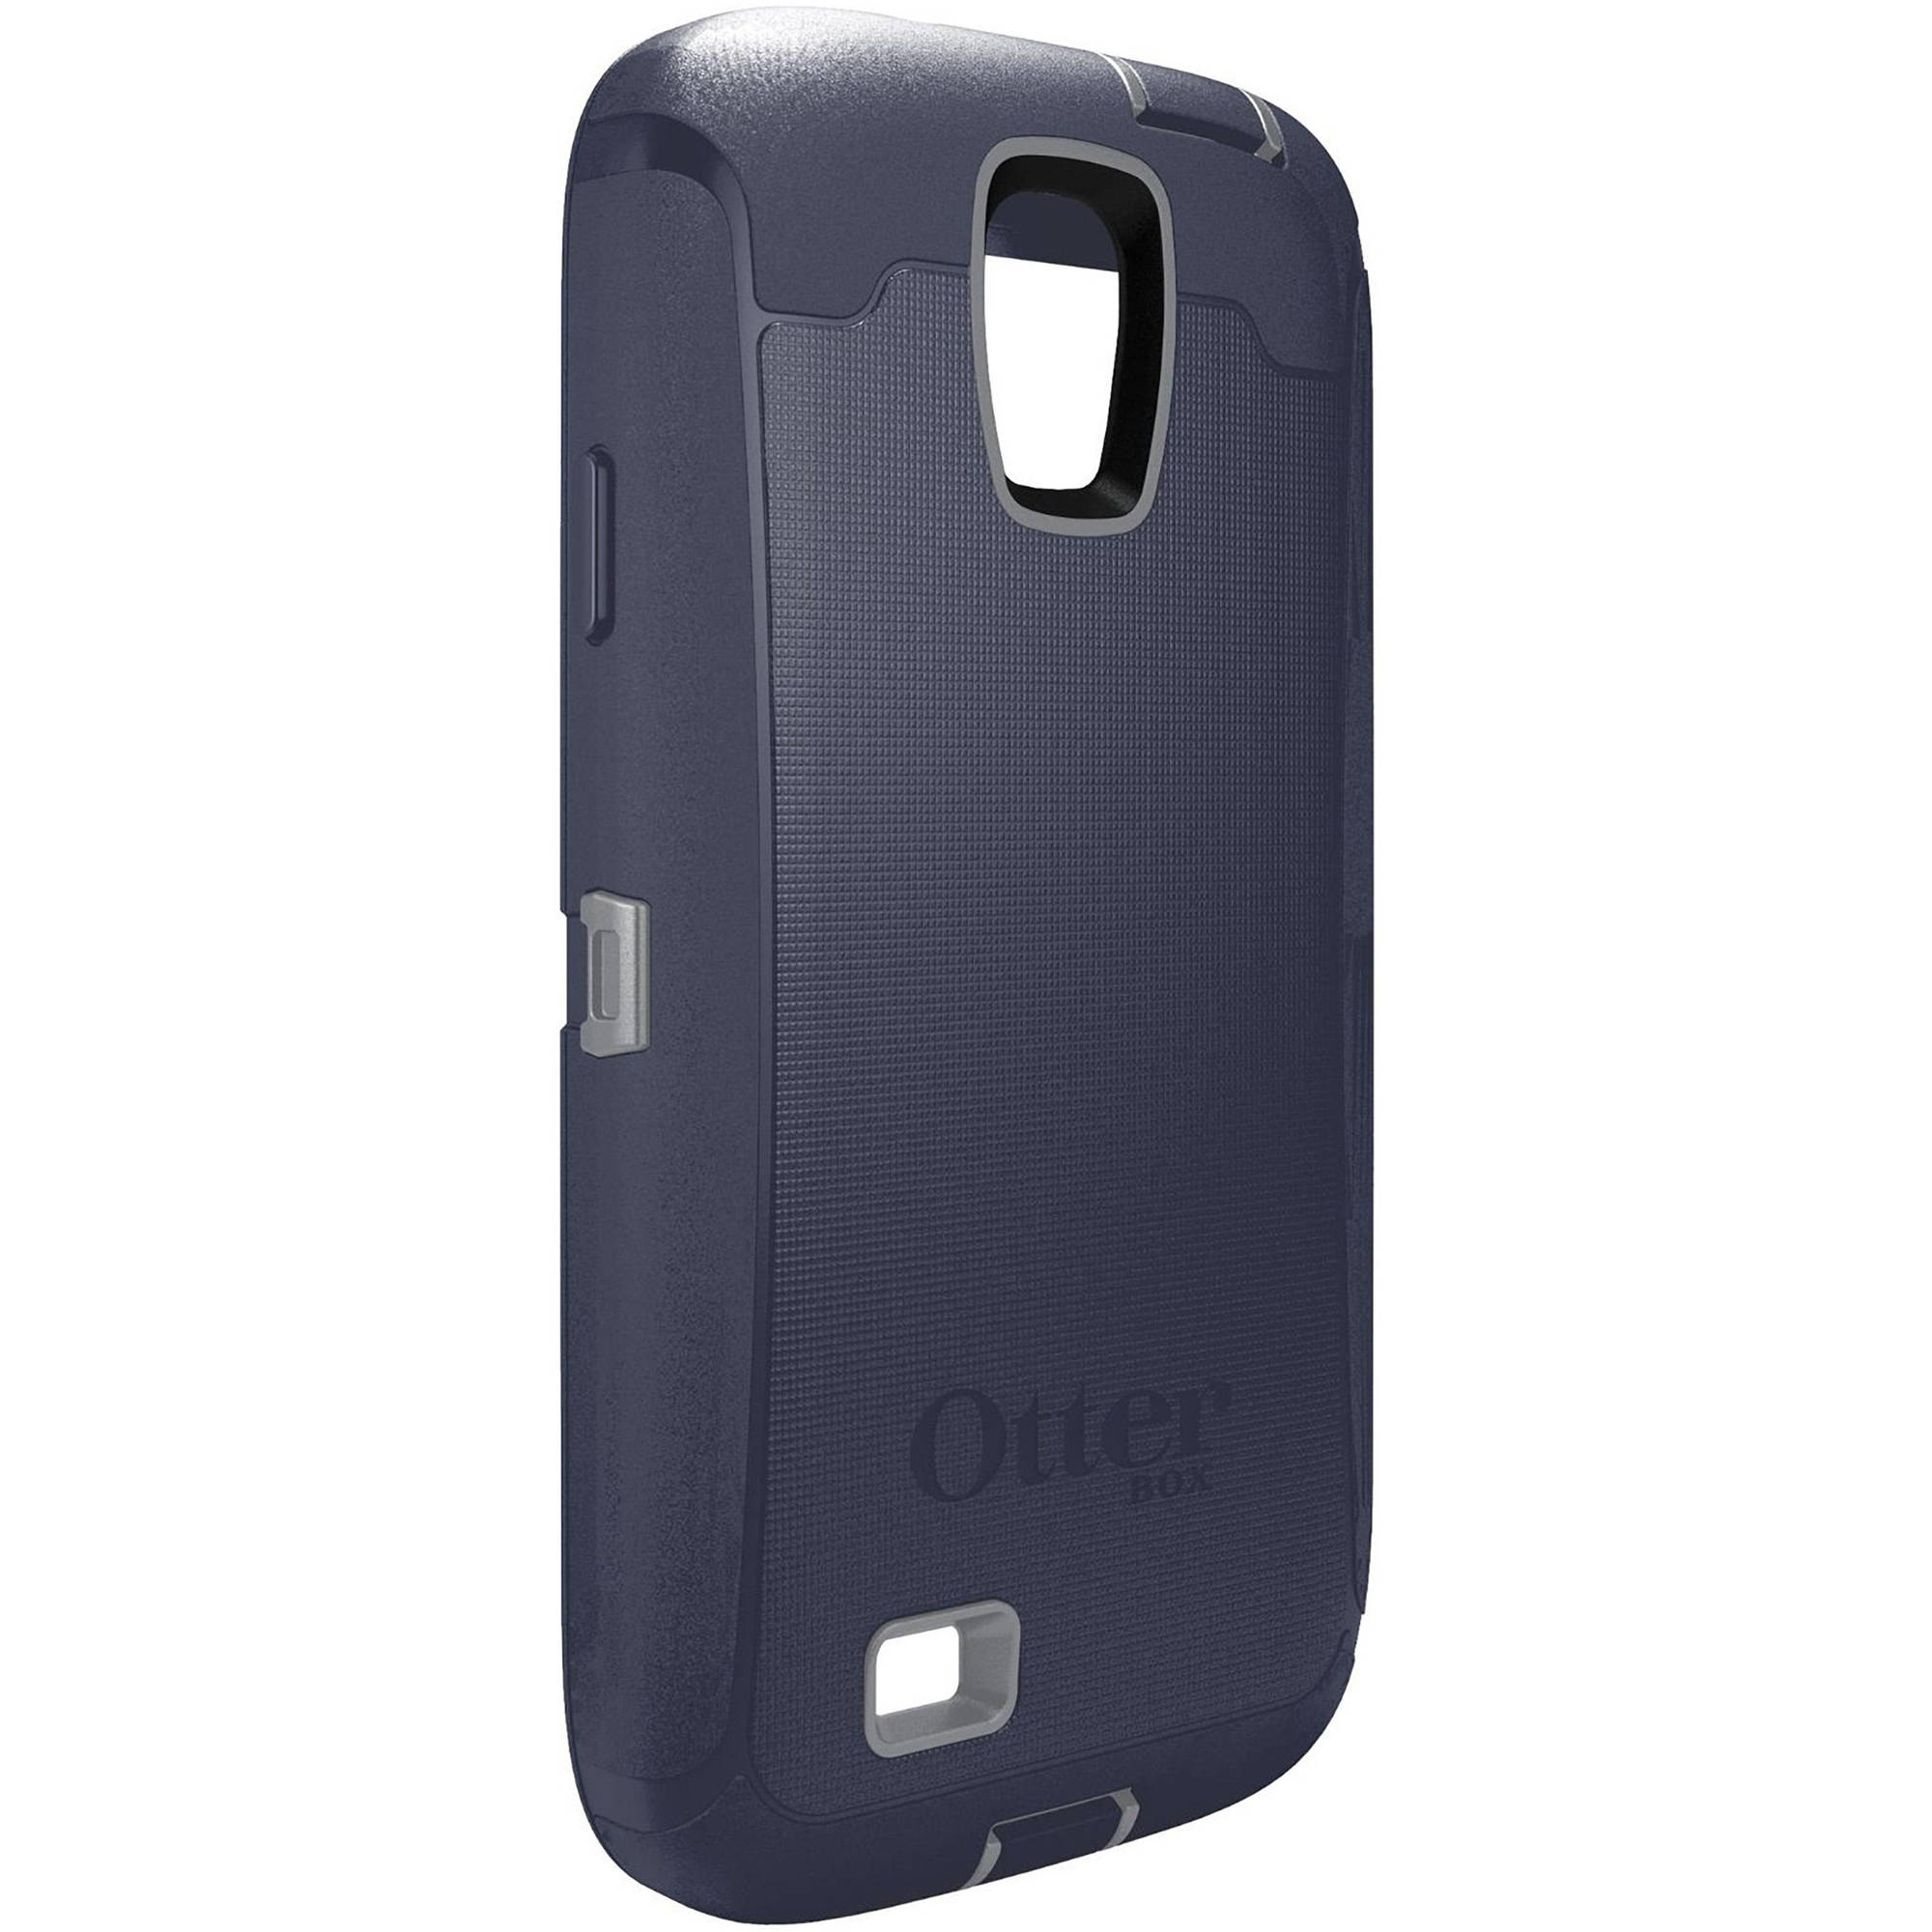 Galaxy S4  Otterbox defender series case - image 3 of 6